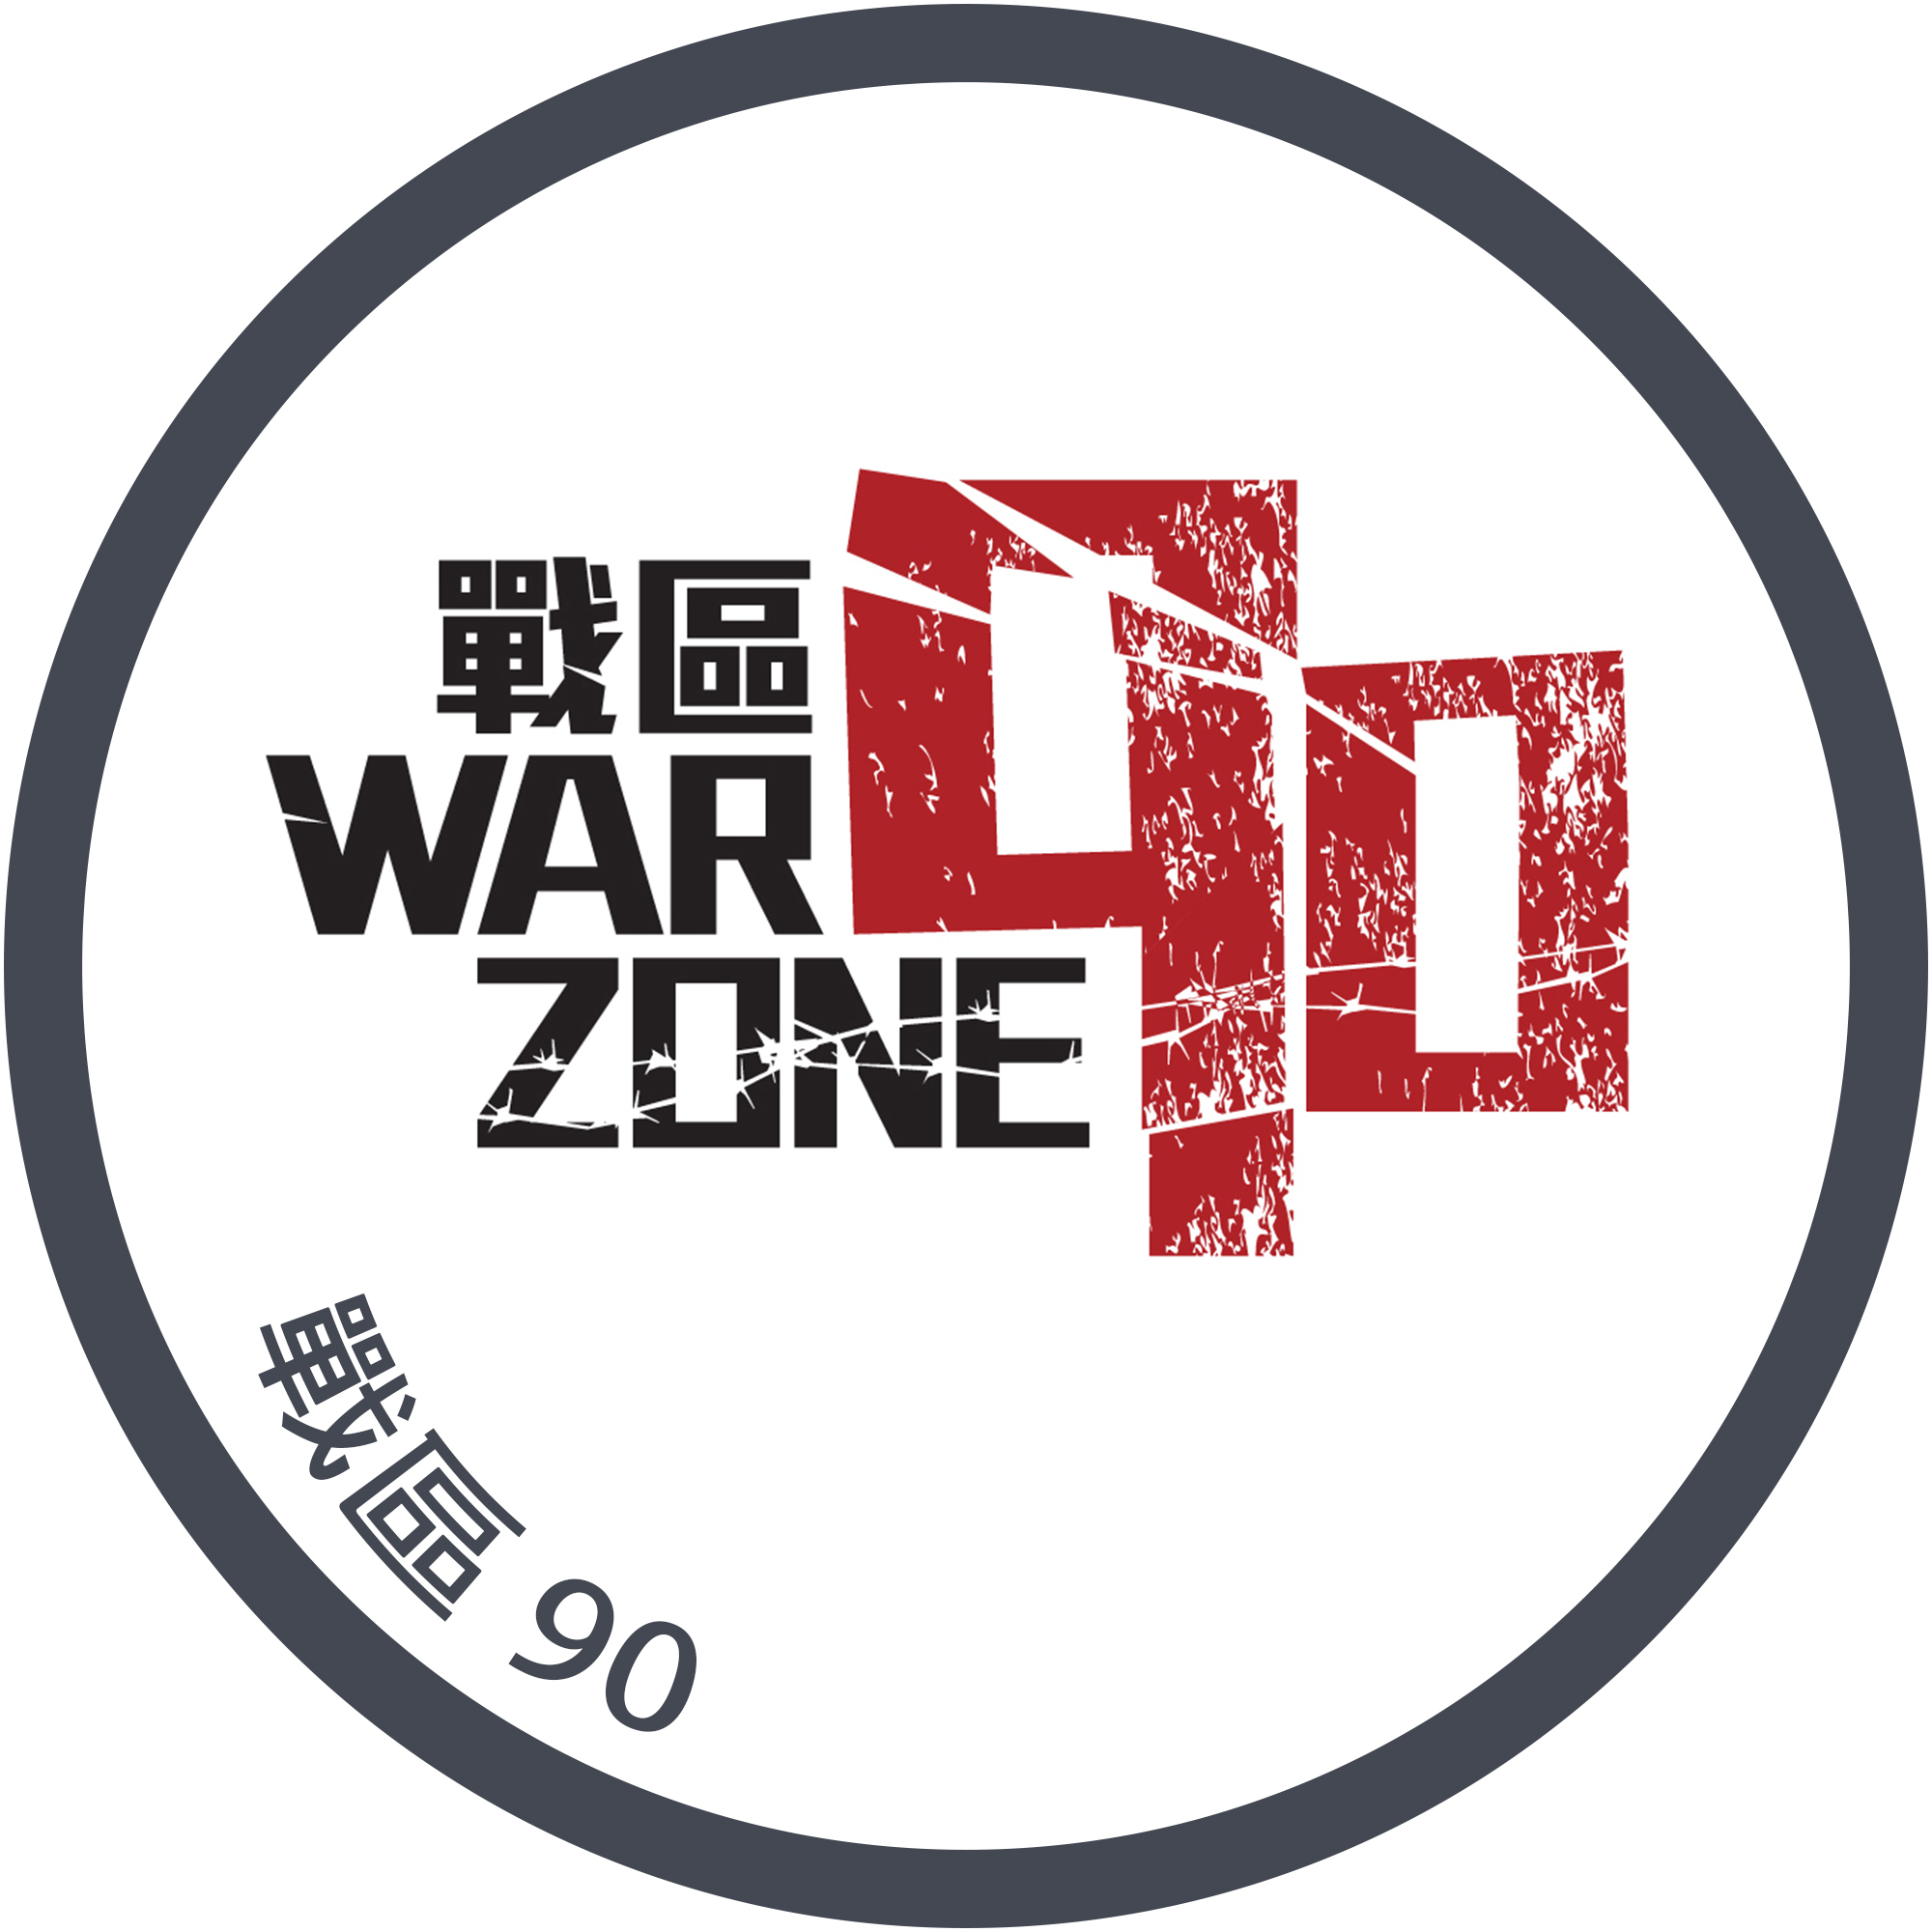 Experiential Simulation: "WARZONE 90"